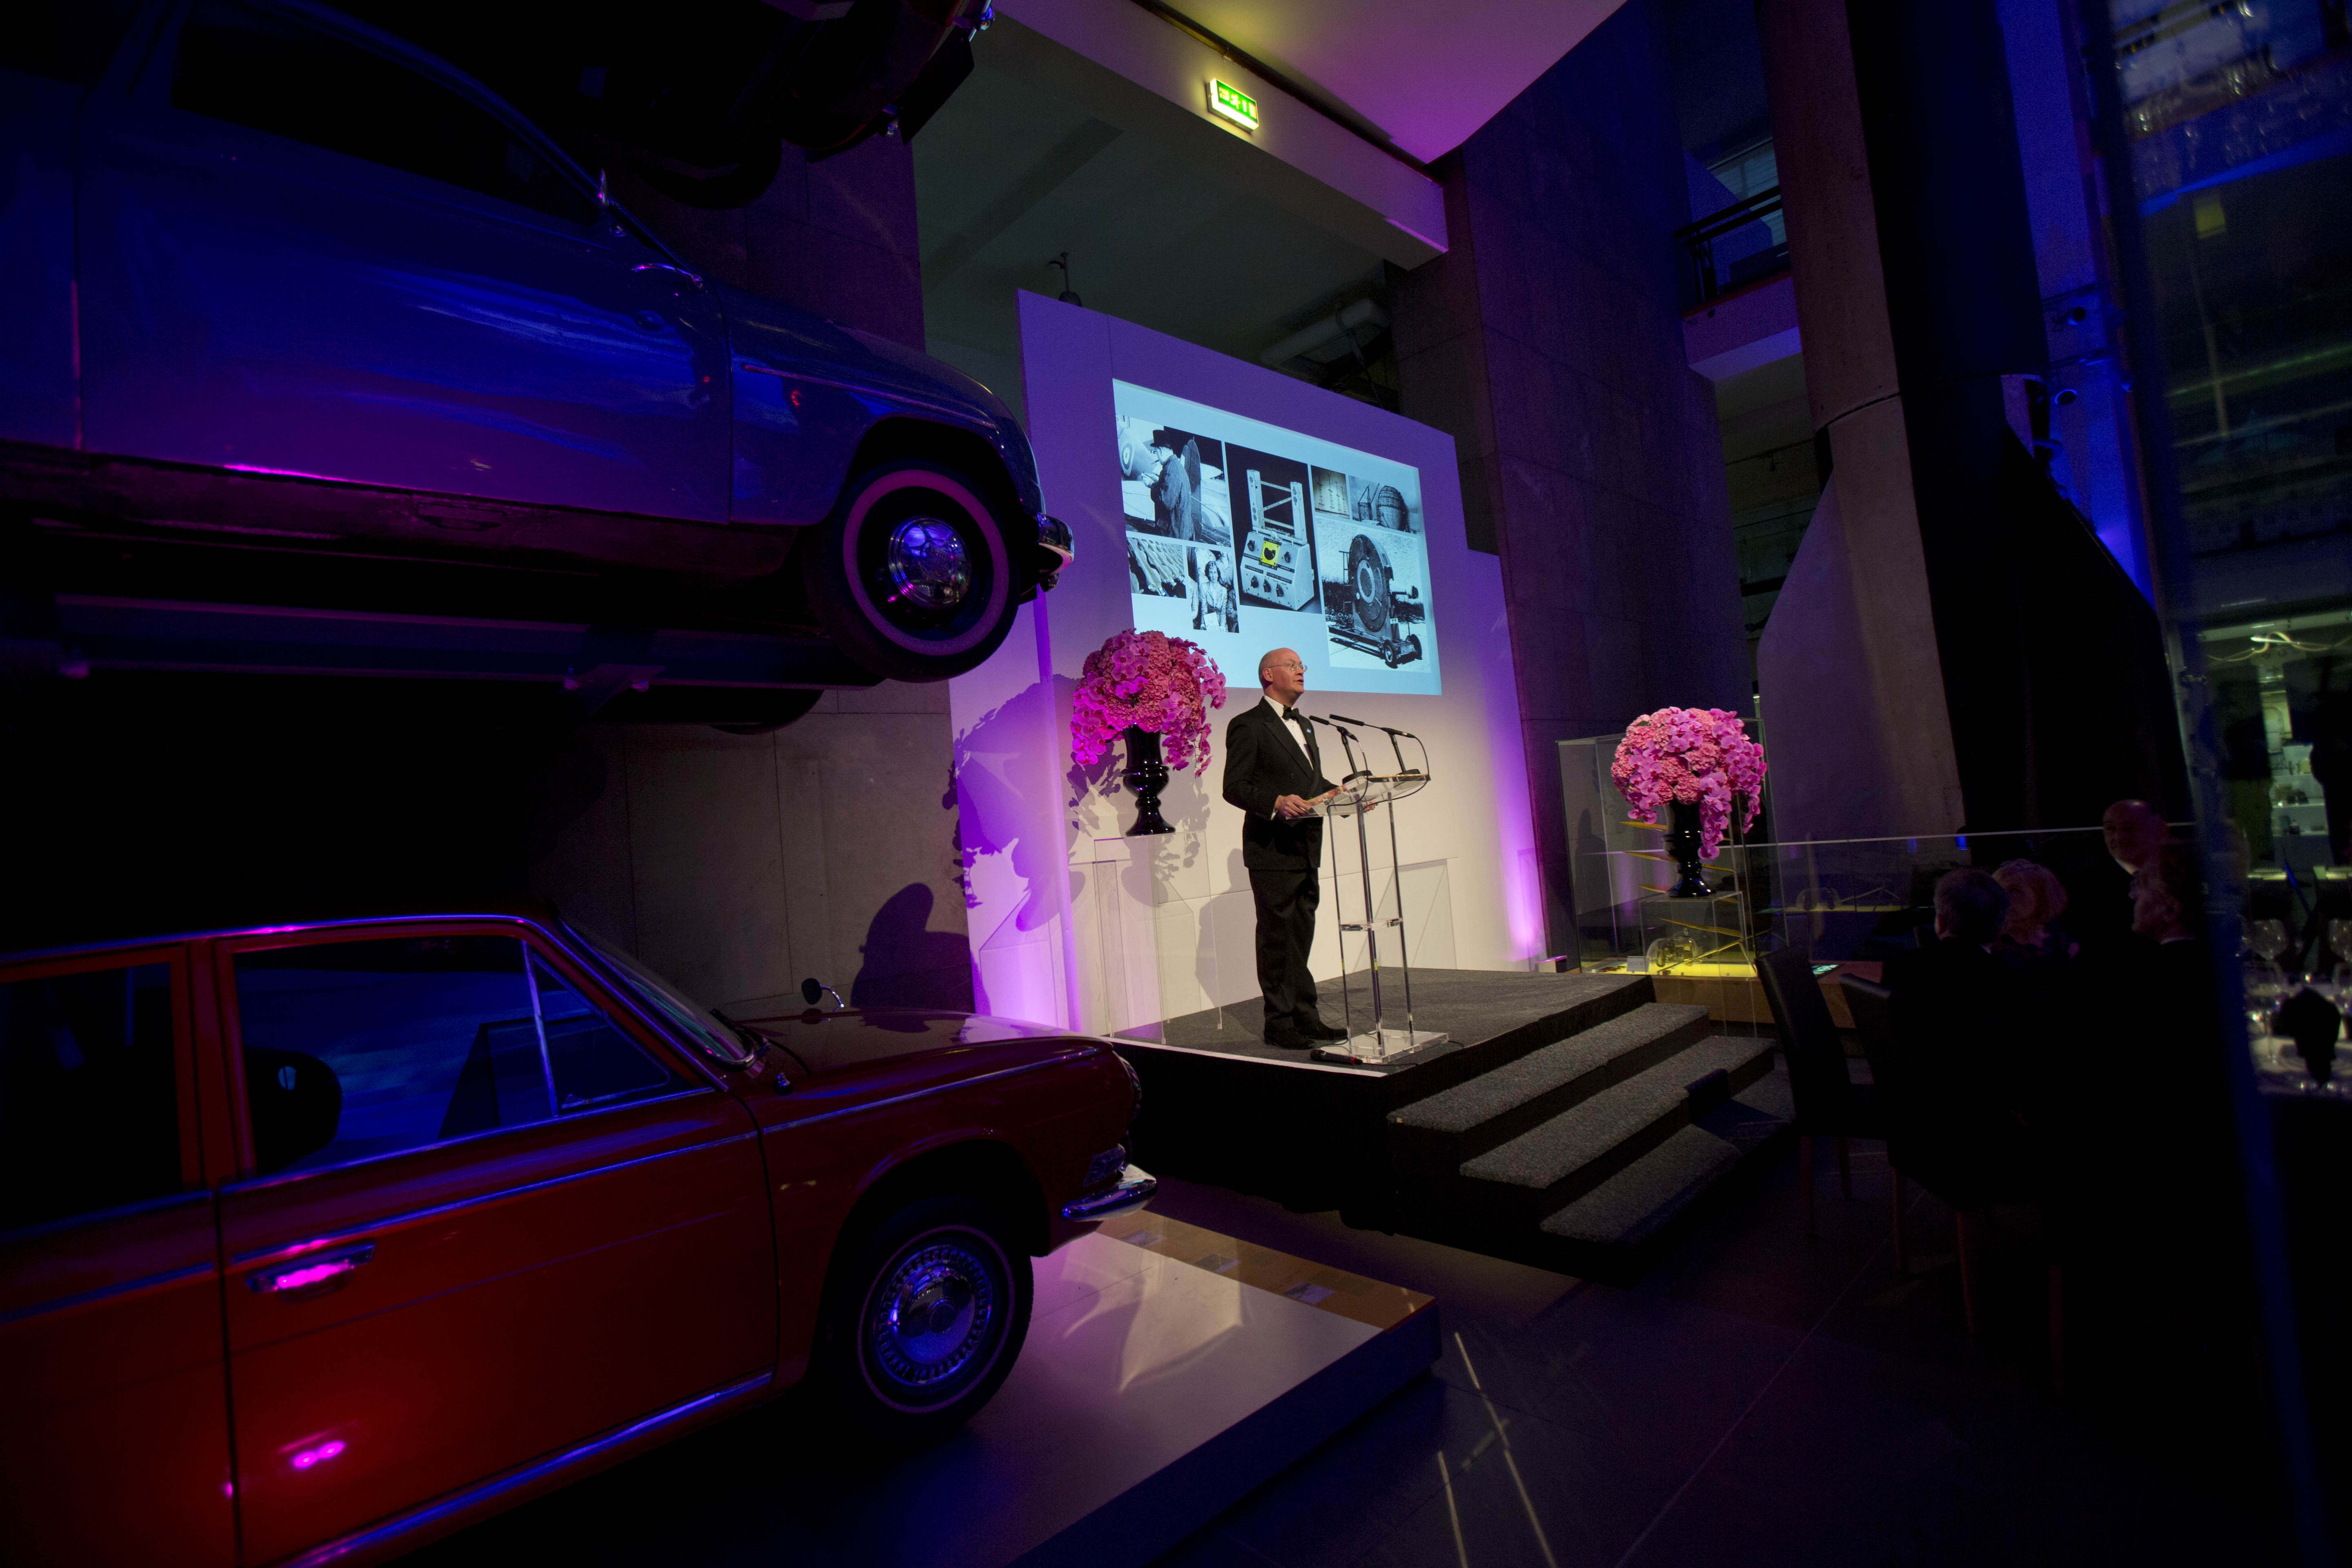 Ian Blatchford welcomes guests to the 2014 Science Museum Director's Annual Dinner